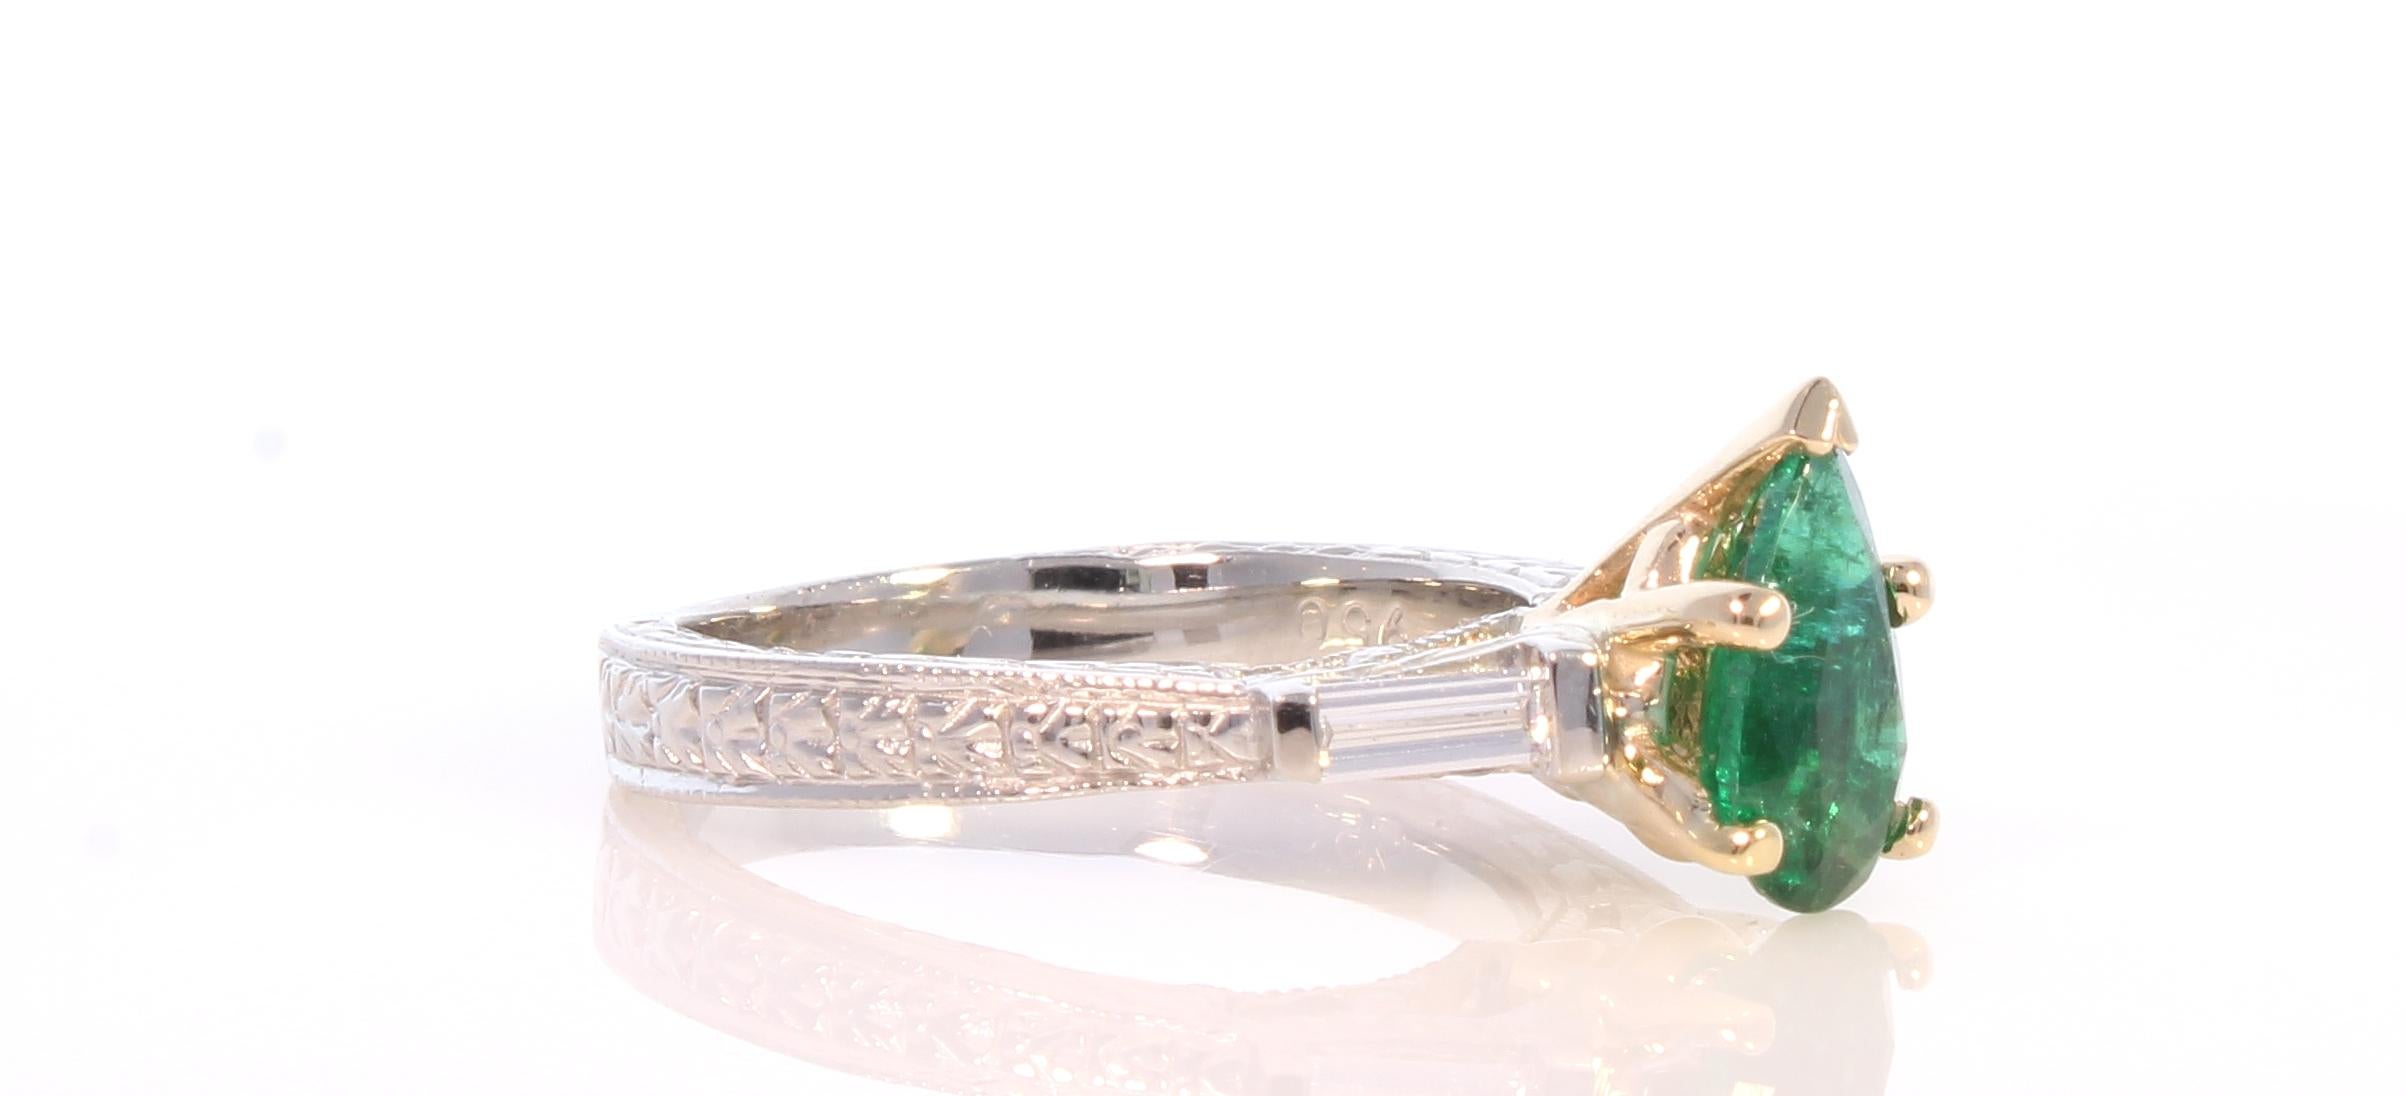 Contemporary 1.04 Carat Pear Shape Green Emerald and Diamond Cocktail Ring in 18 Karat Gold